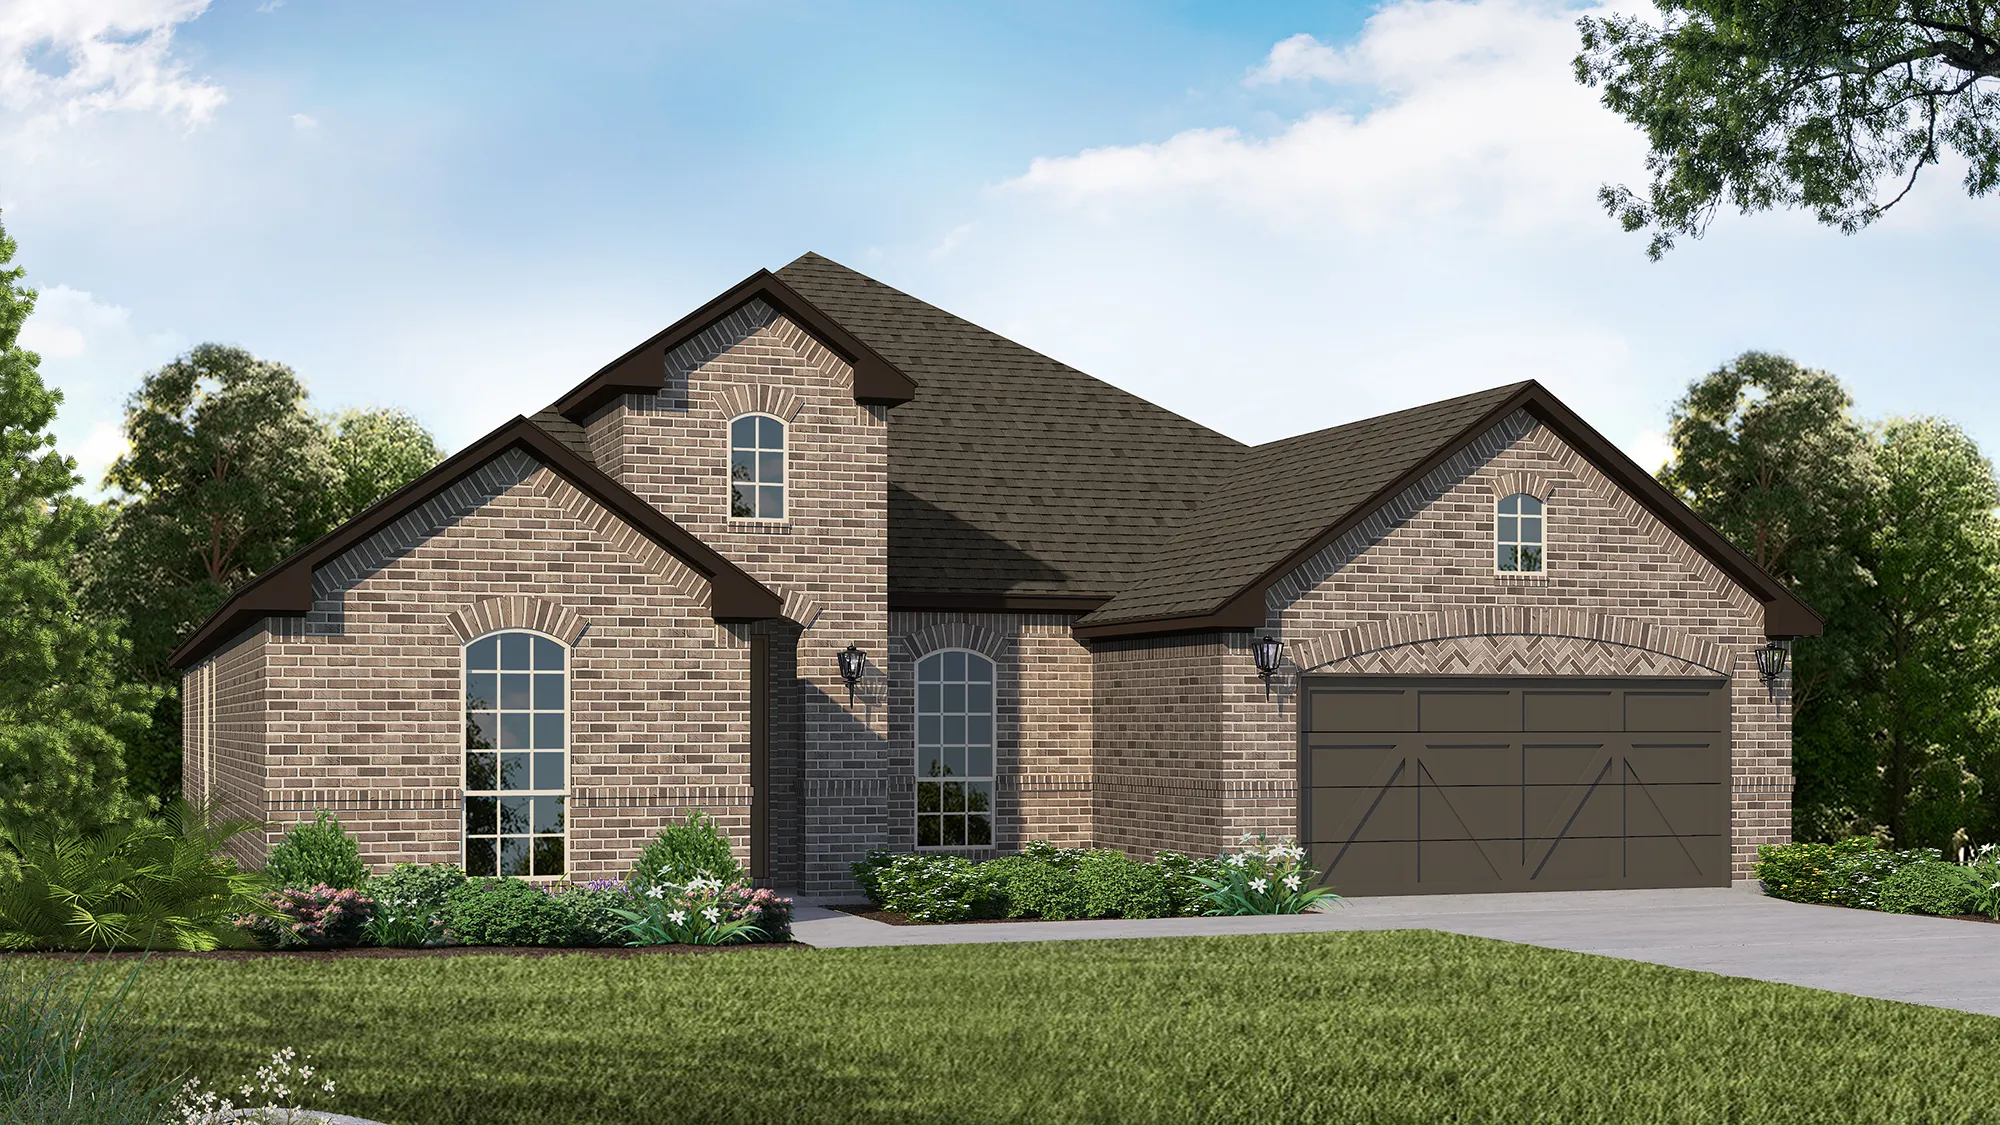 Plan 1688 Elevation A by American Legend Homes